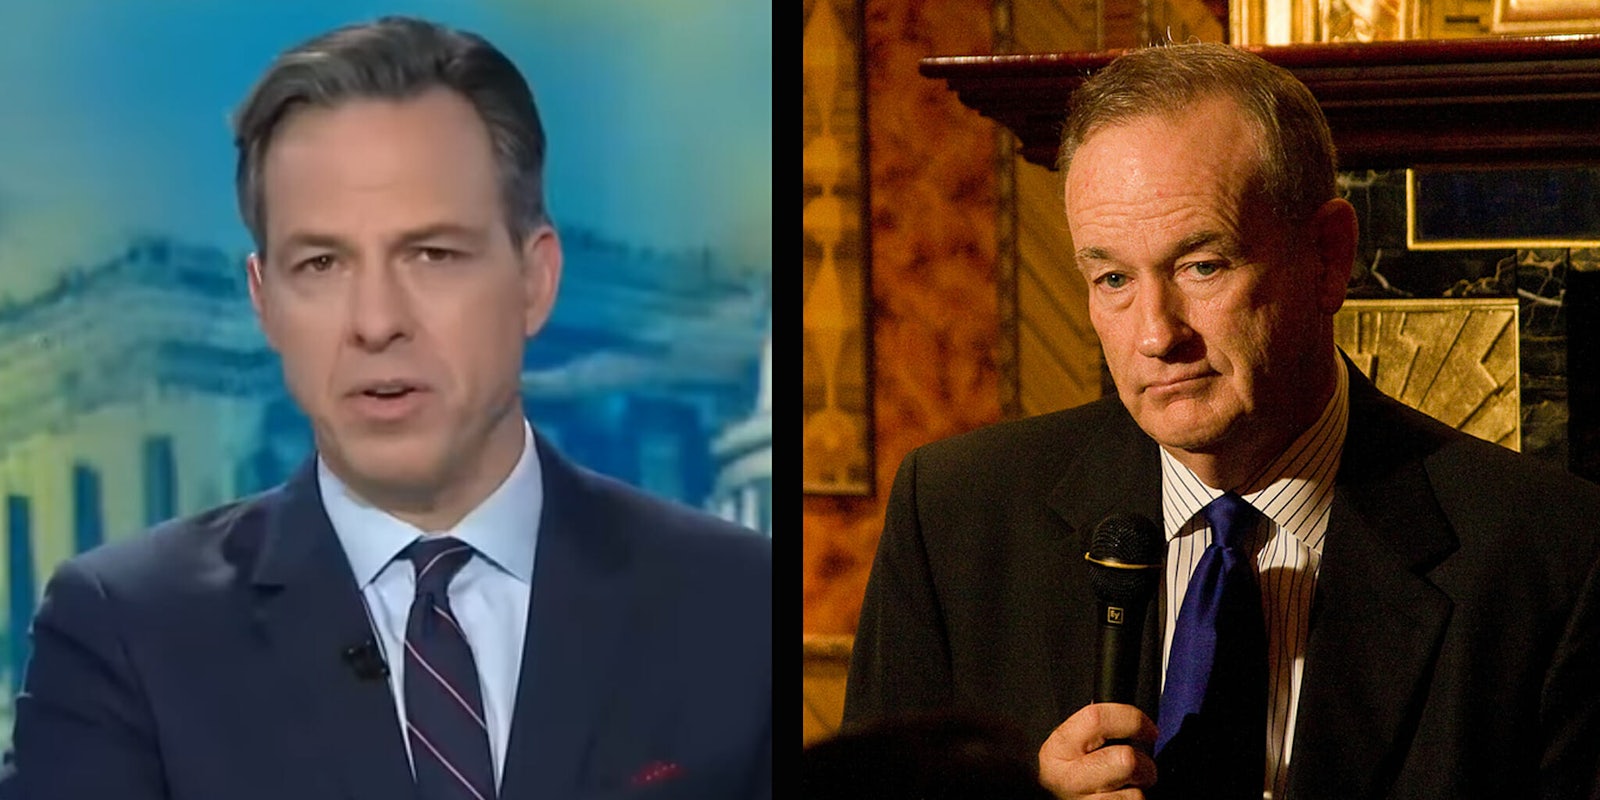 Jake Tapper hit back hard after Bill O'Reilly taunted him over ratings on Twitter.